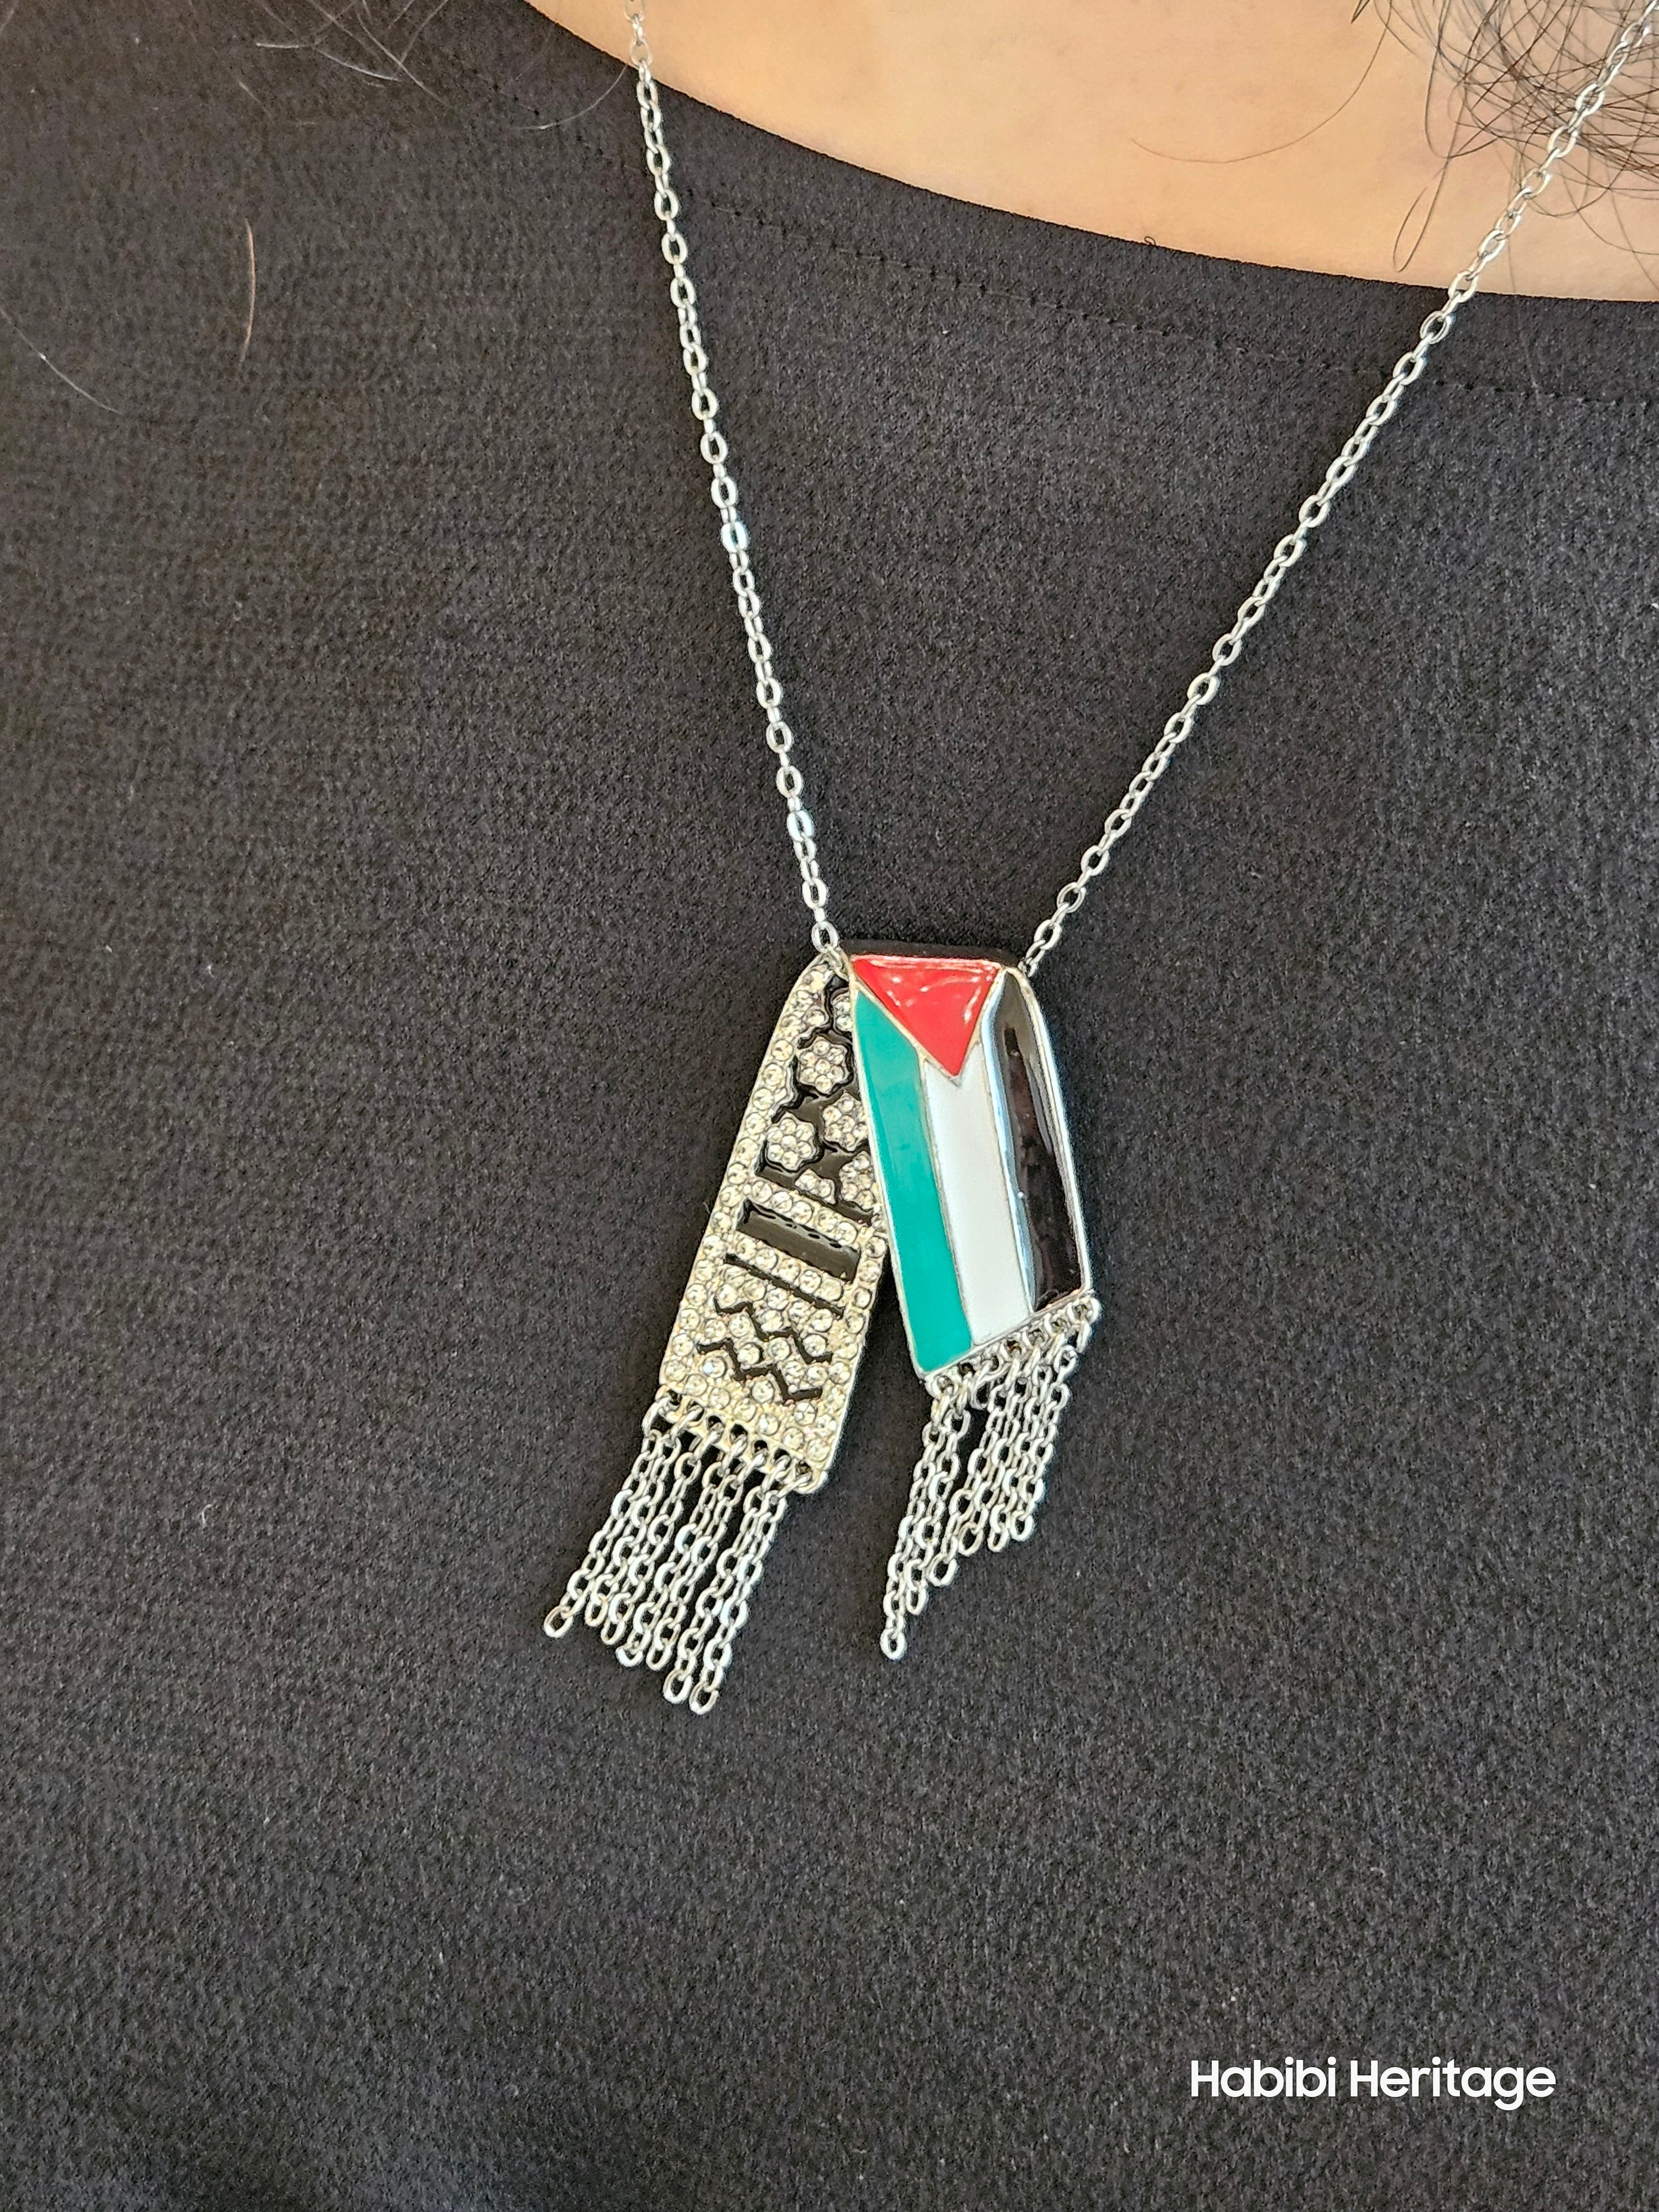 Palestine Keffiyeh Necklace - 3 options - Gold or Silver